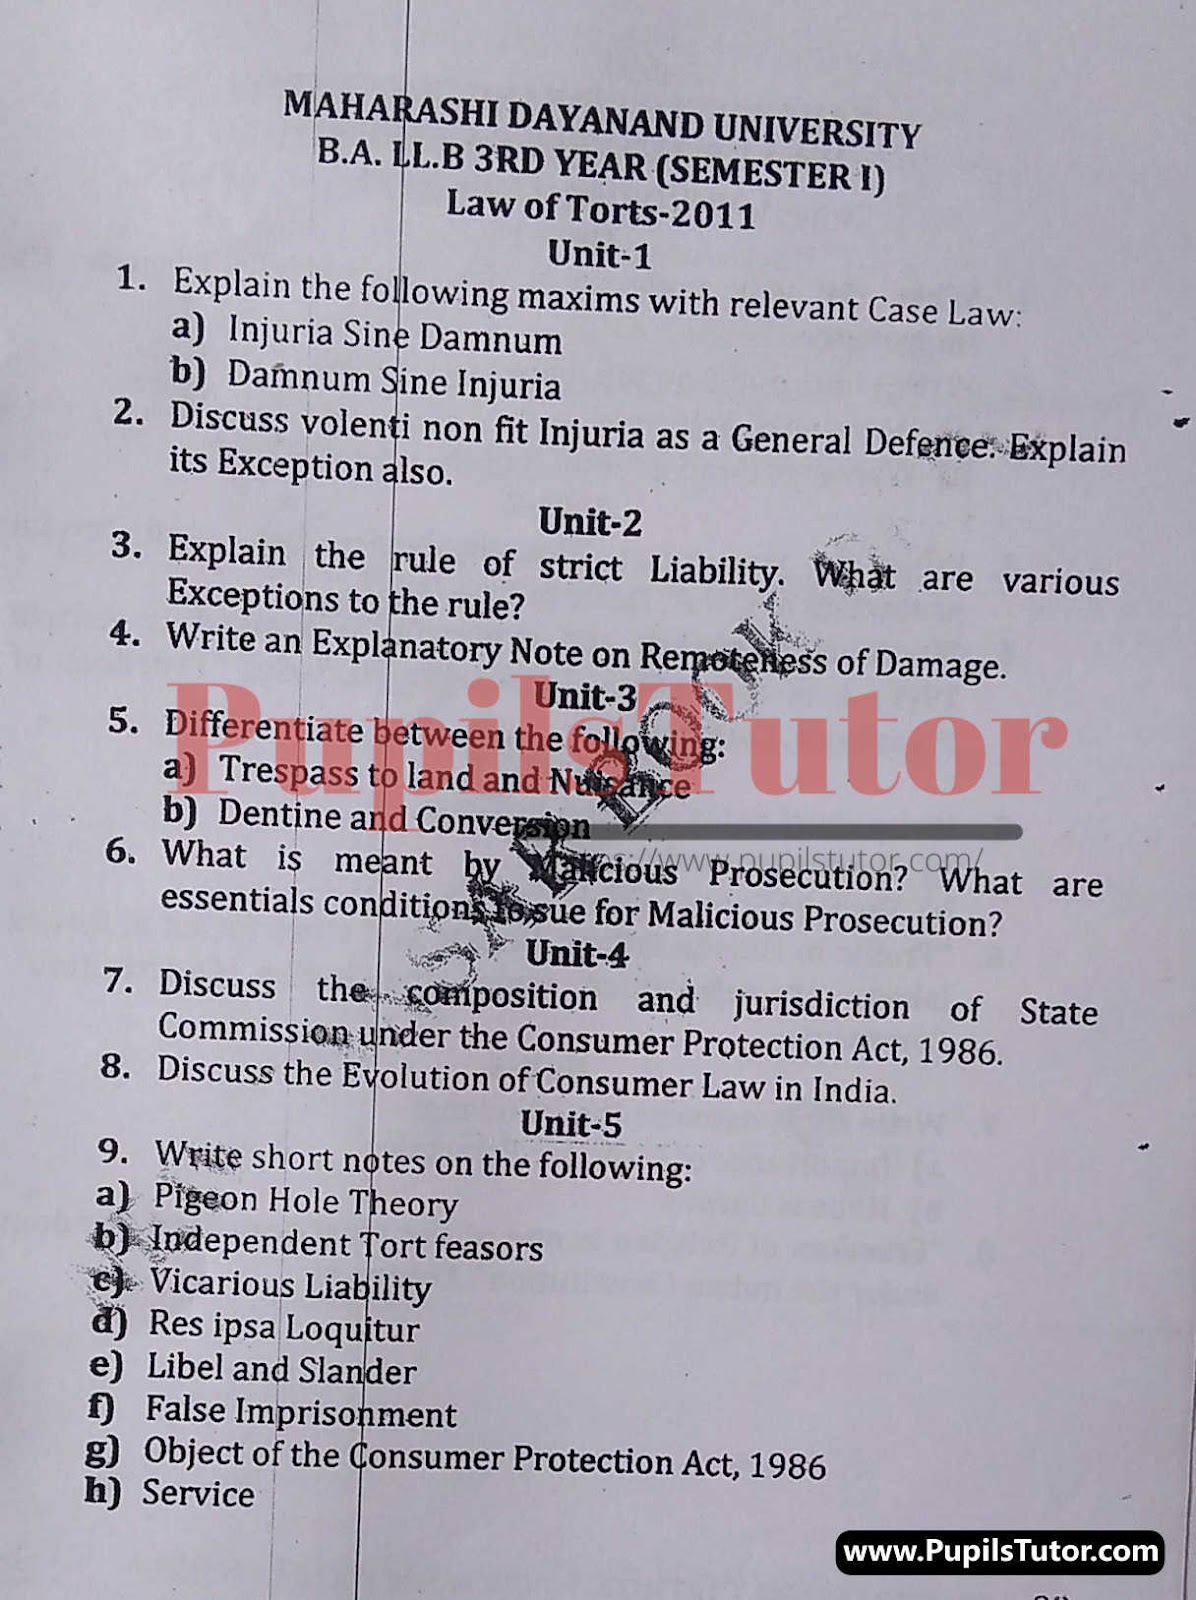 MDU (Maharshi Dayanand University, Rohtak Haryana) LLB Regular Exam (Hons.) First Semester Previous Year Law Of Torts Question Paper For 2011 Exam (Question Paper Page 1) - pupilstutor.com